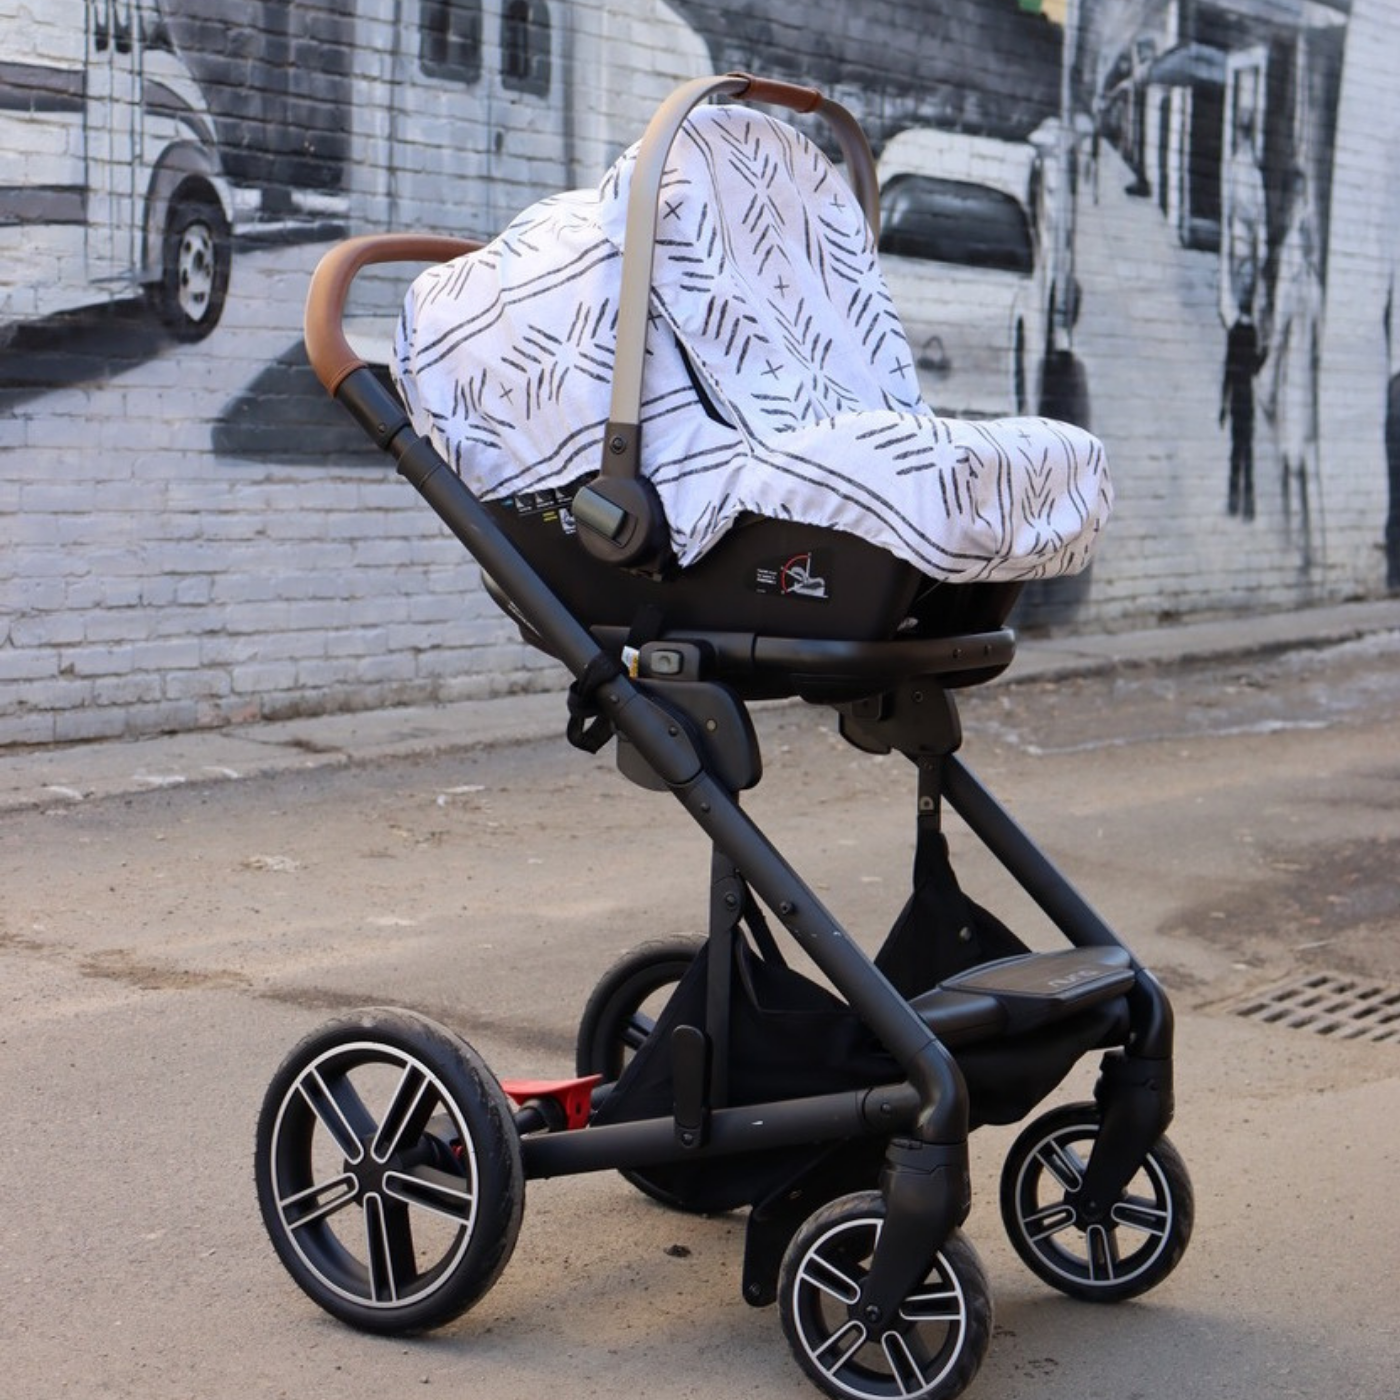 A black stroller sits in front of a black-and-white mural painted on a brick wall. The mural is of cars parked along a street with several pedestrians walking on a sidewalk to the right. A fabric cover is over the top of the stroller featuring a design with a white background and small black lines in geometric shapes.